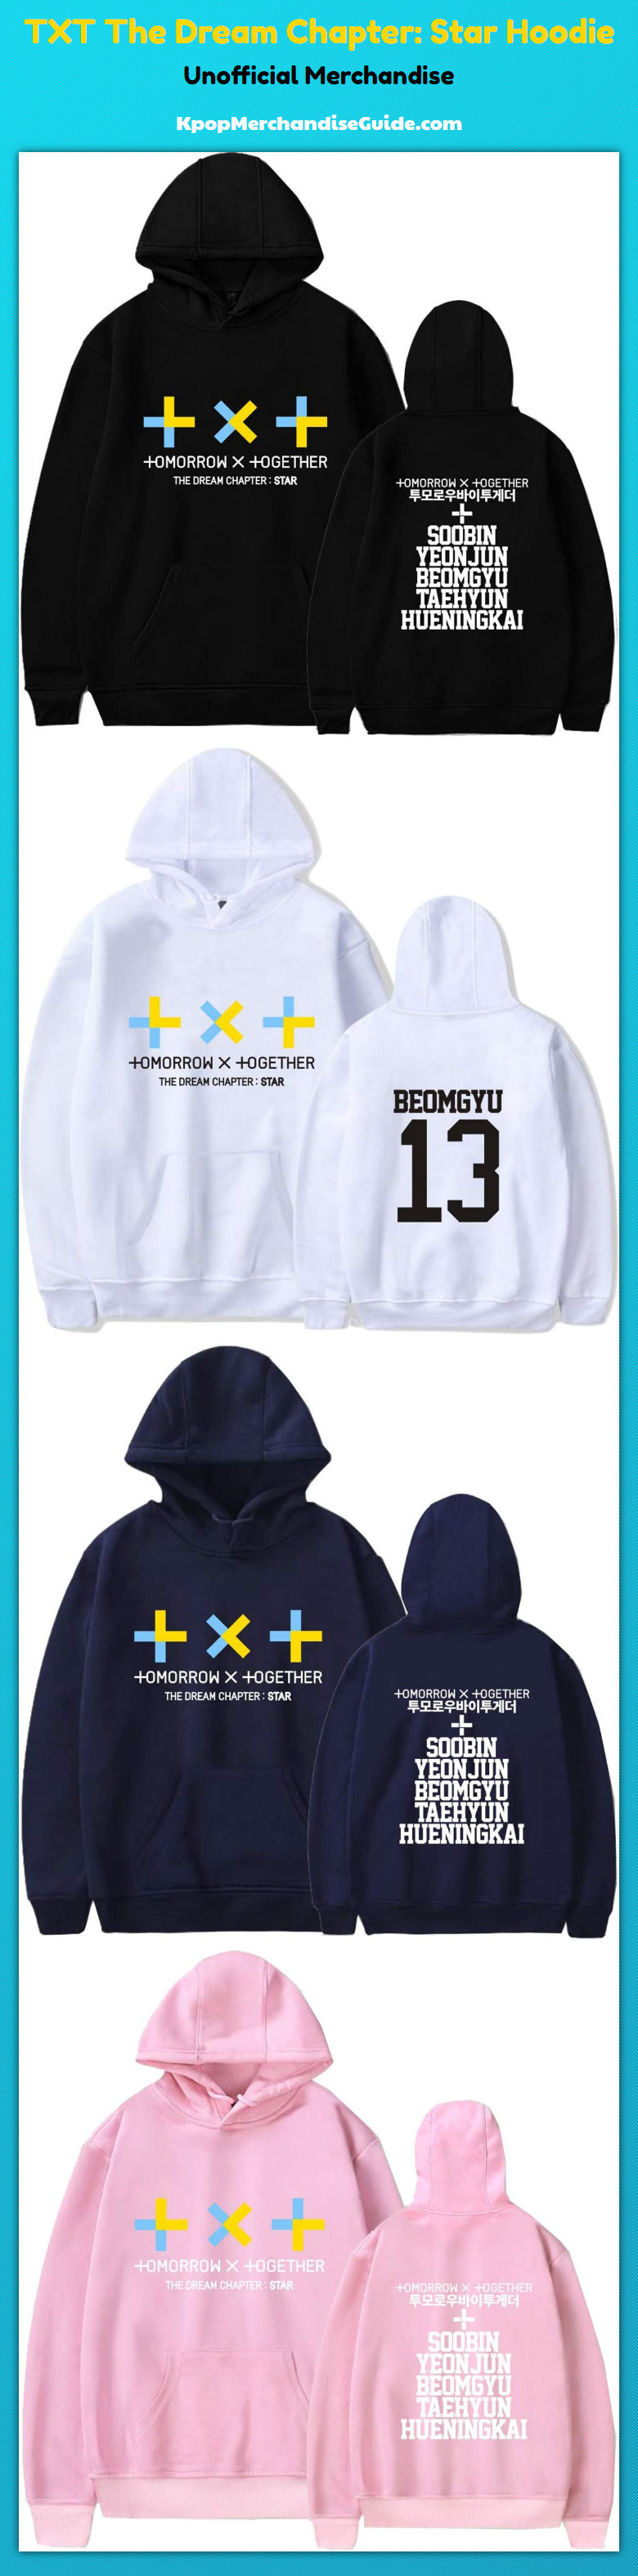 TXT The Dream Chapter: Star Hoodie